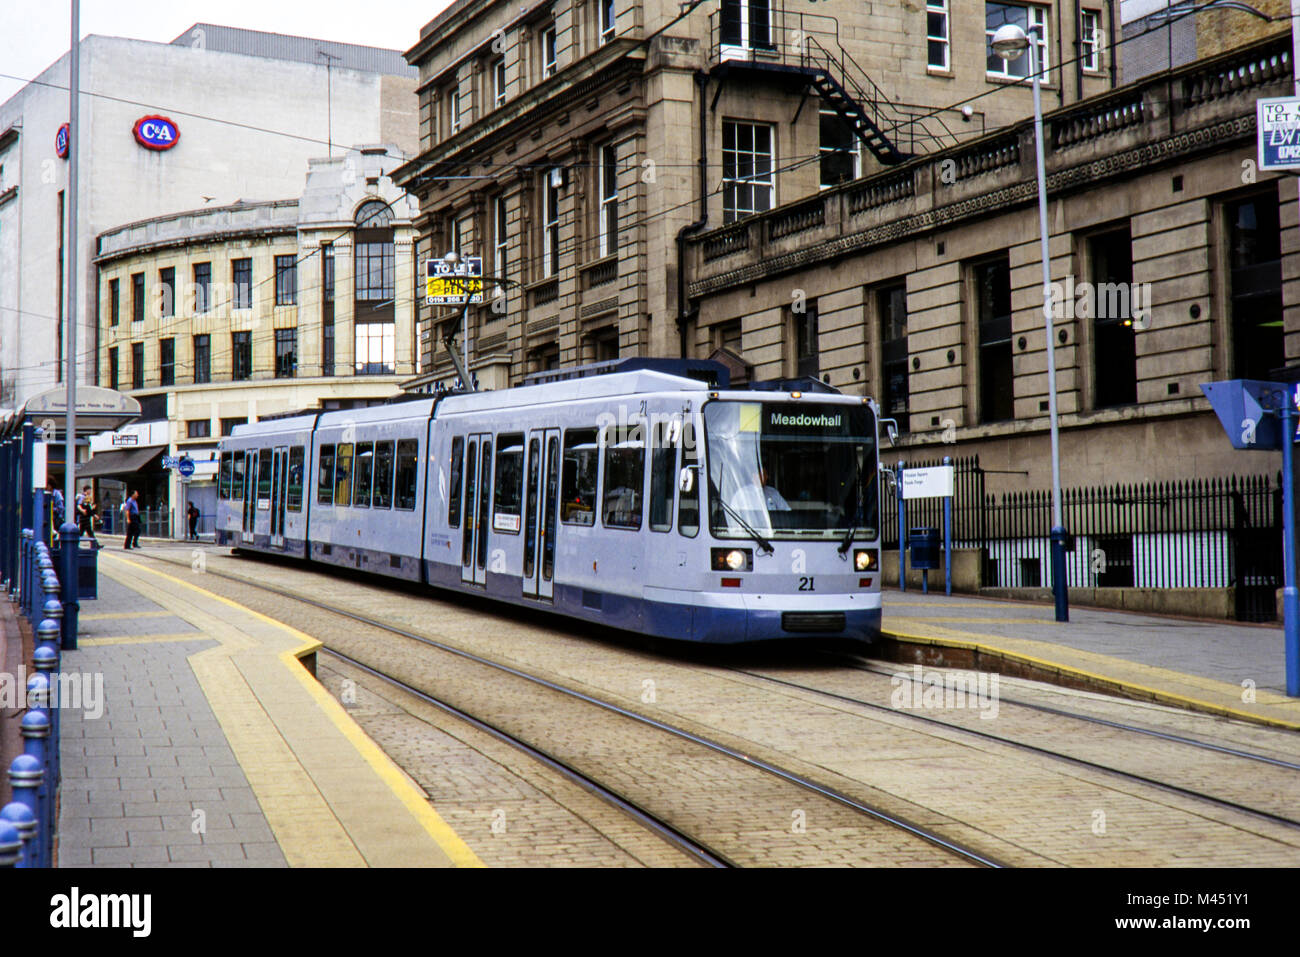 Sheffield Super Tram No21 with original livery on route to Meadowhall. Image taken in August 1996 Stock Photo